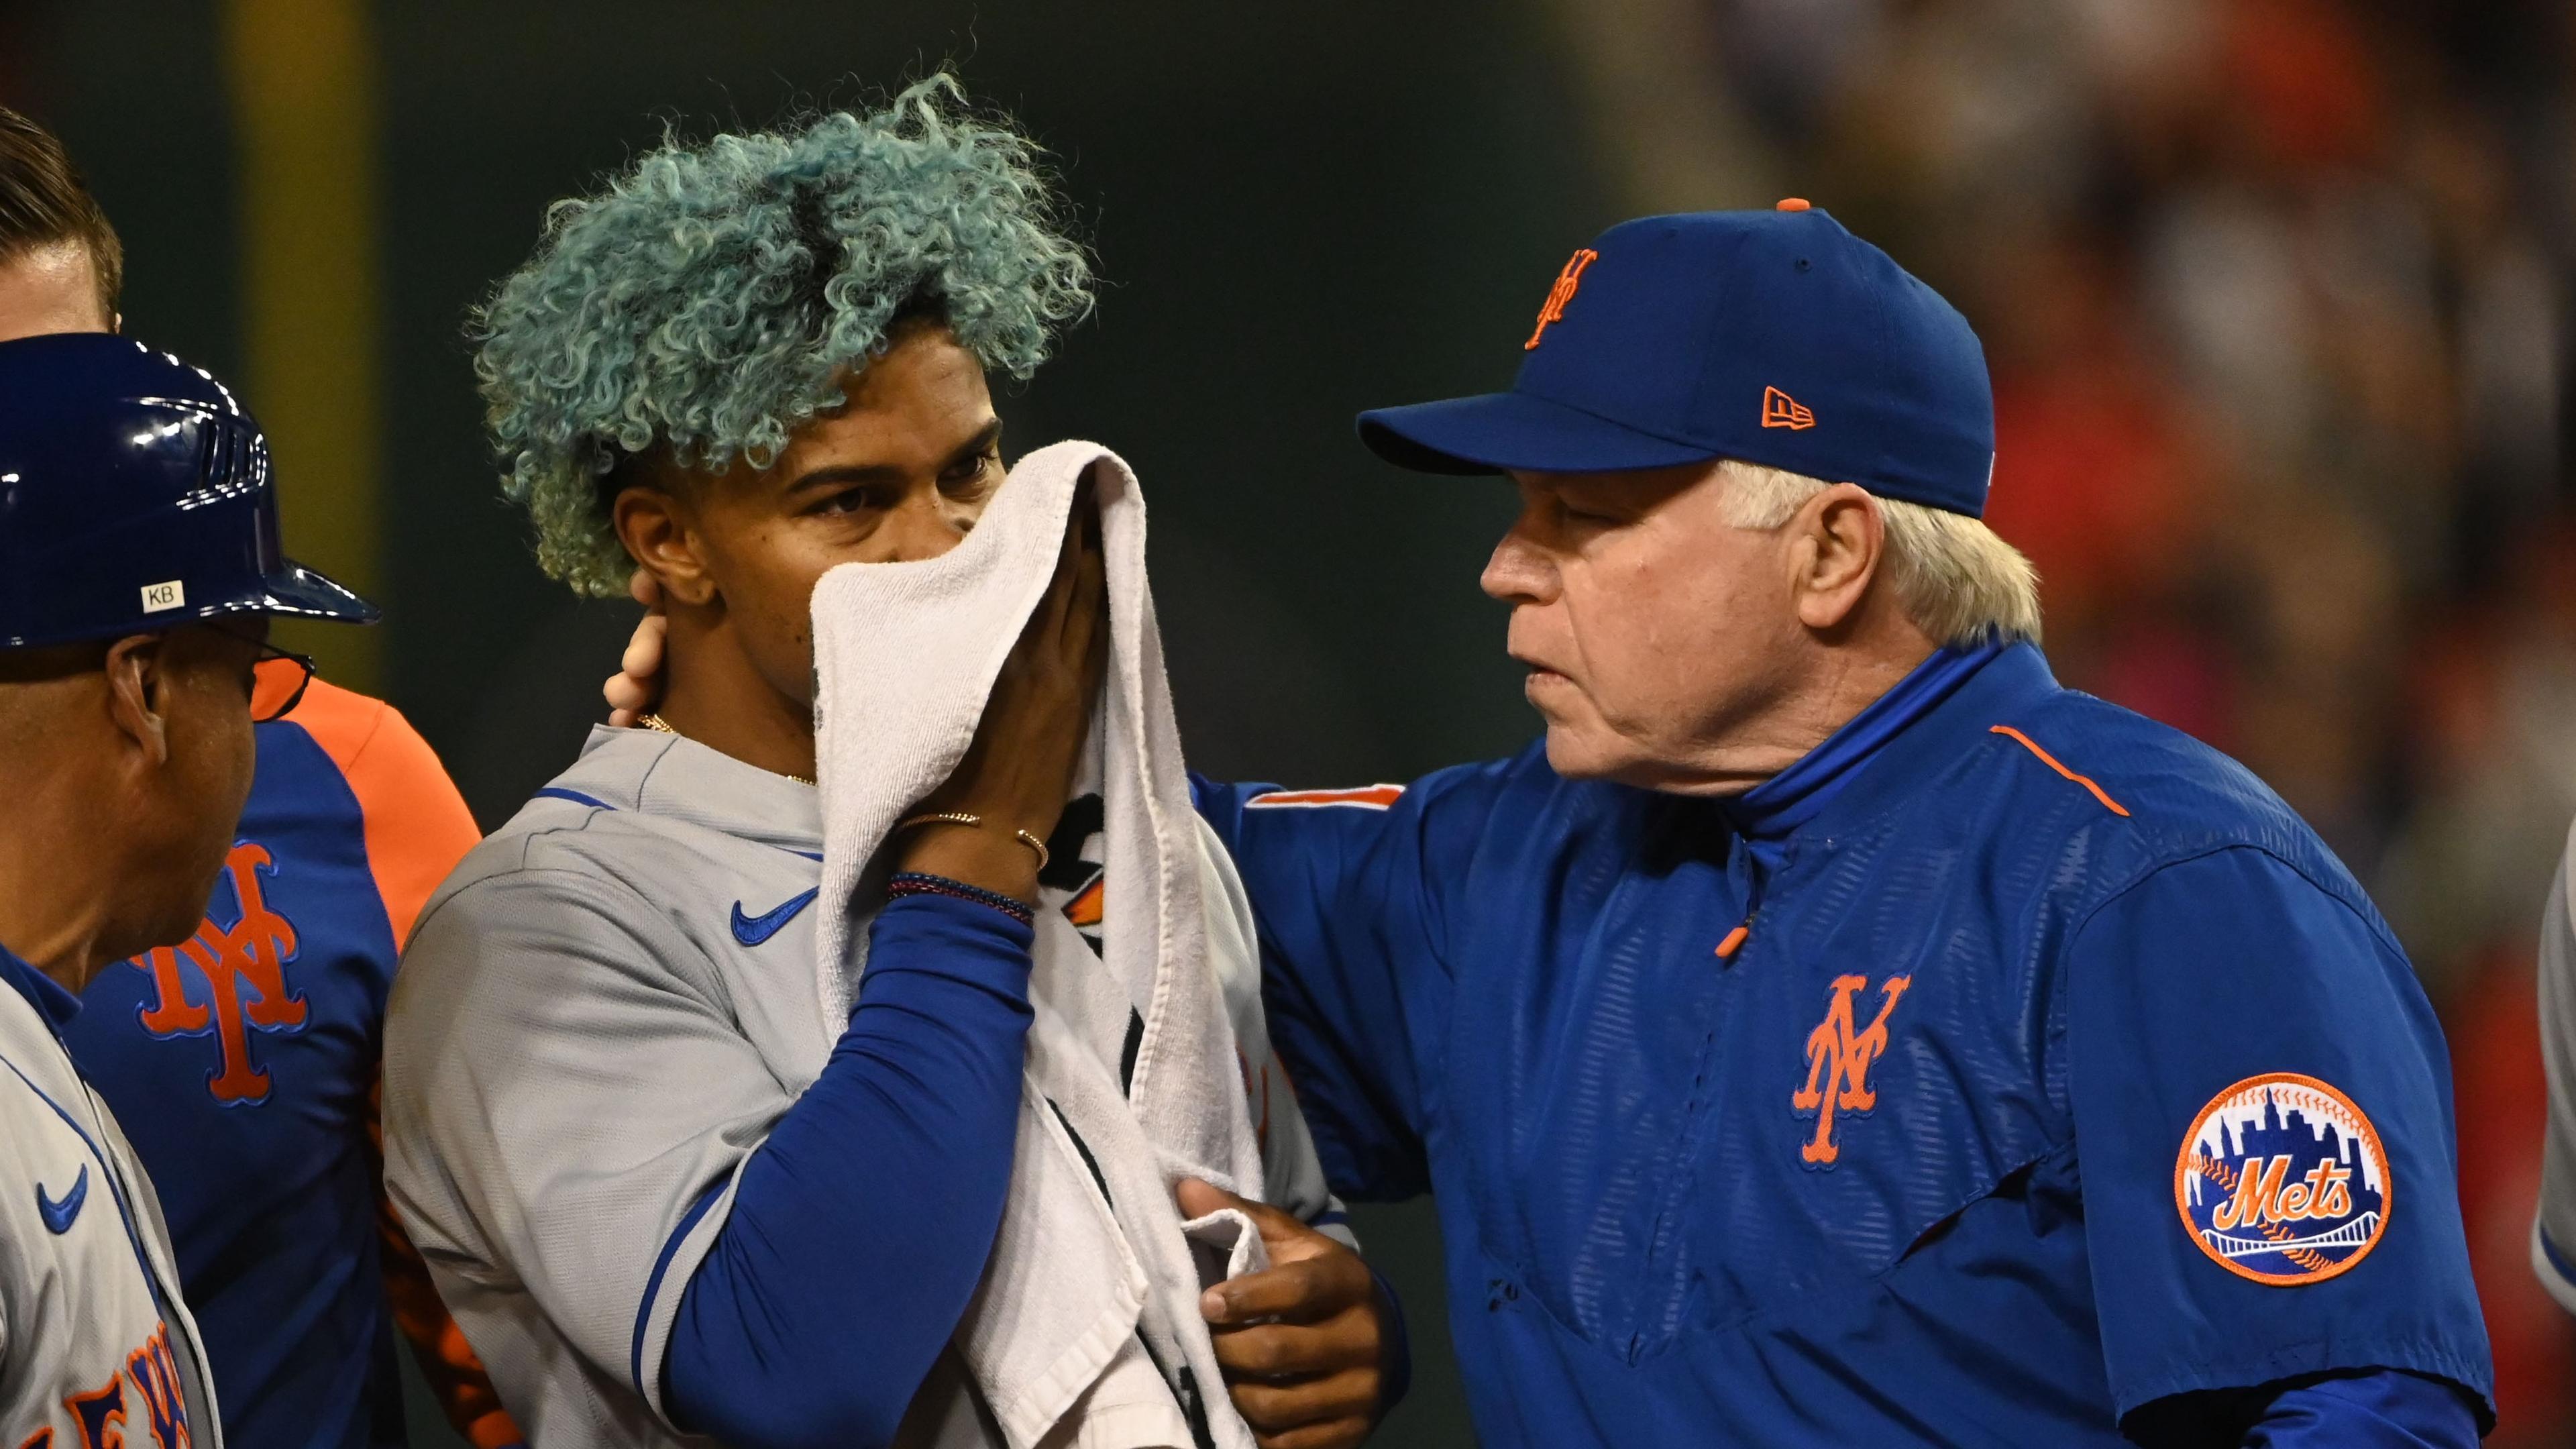 Apr 8, 2022; Washington, District of Columbia, USA; New York Mets shortstop Francisco Lindor (12) covers his face after being hit by pitch while manager Buck Showalter (11) walks with him during the fifth inning against the Washington Nationals at Nationals Park. Mandatory Credit: Tommy Gilligan-USA TODAY Sports / Tommy Gilligan-USA TODAY Sports